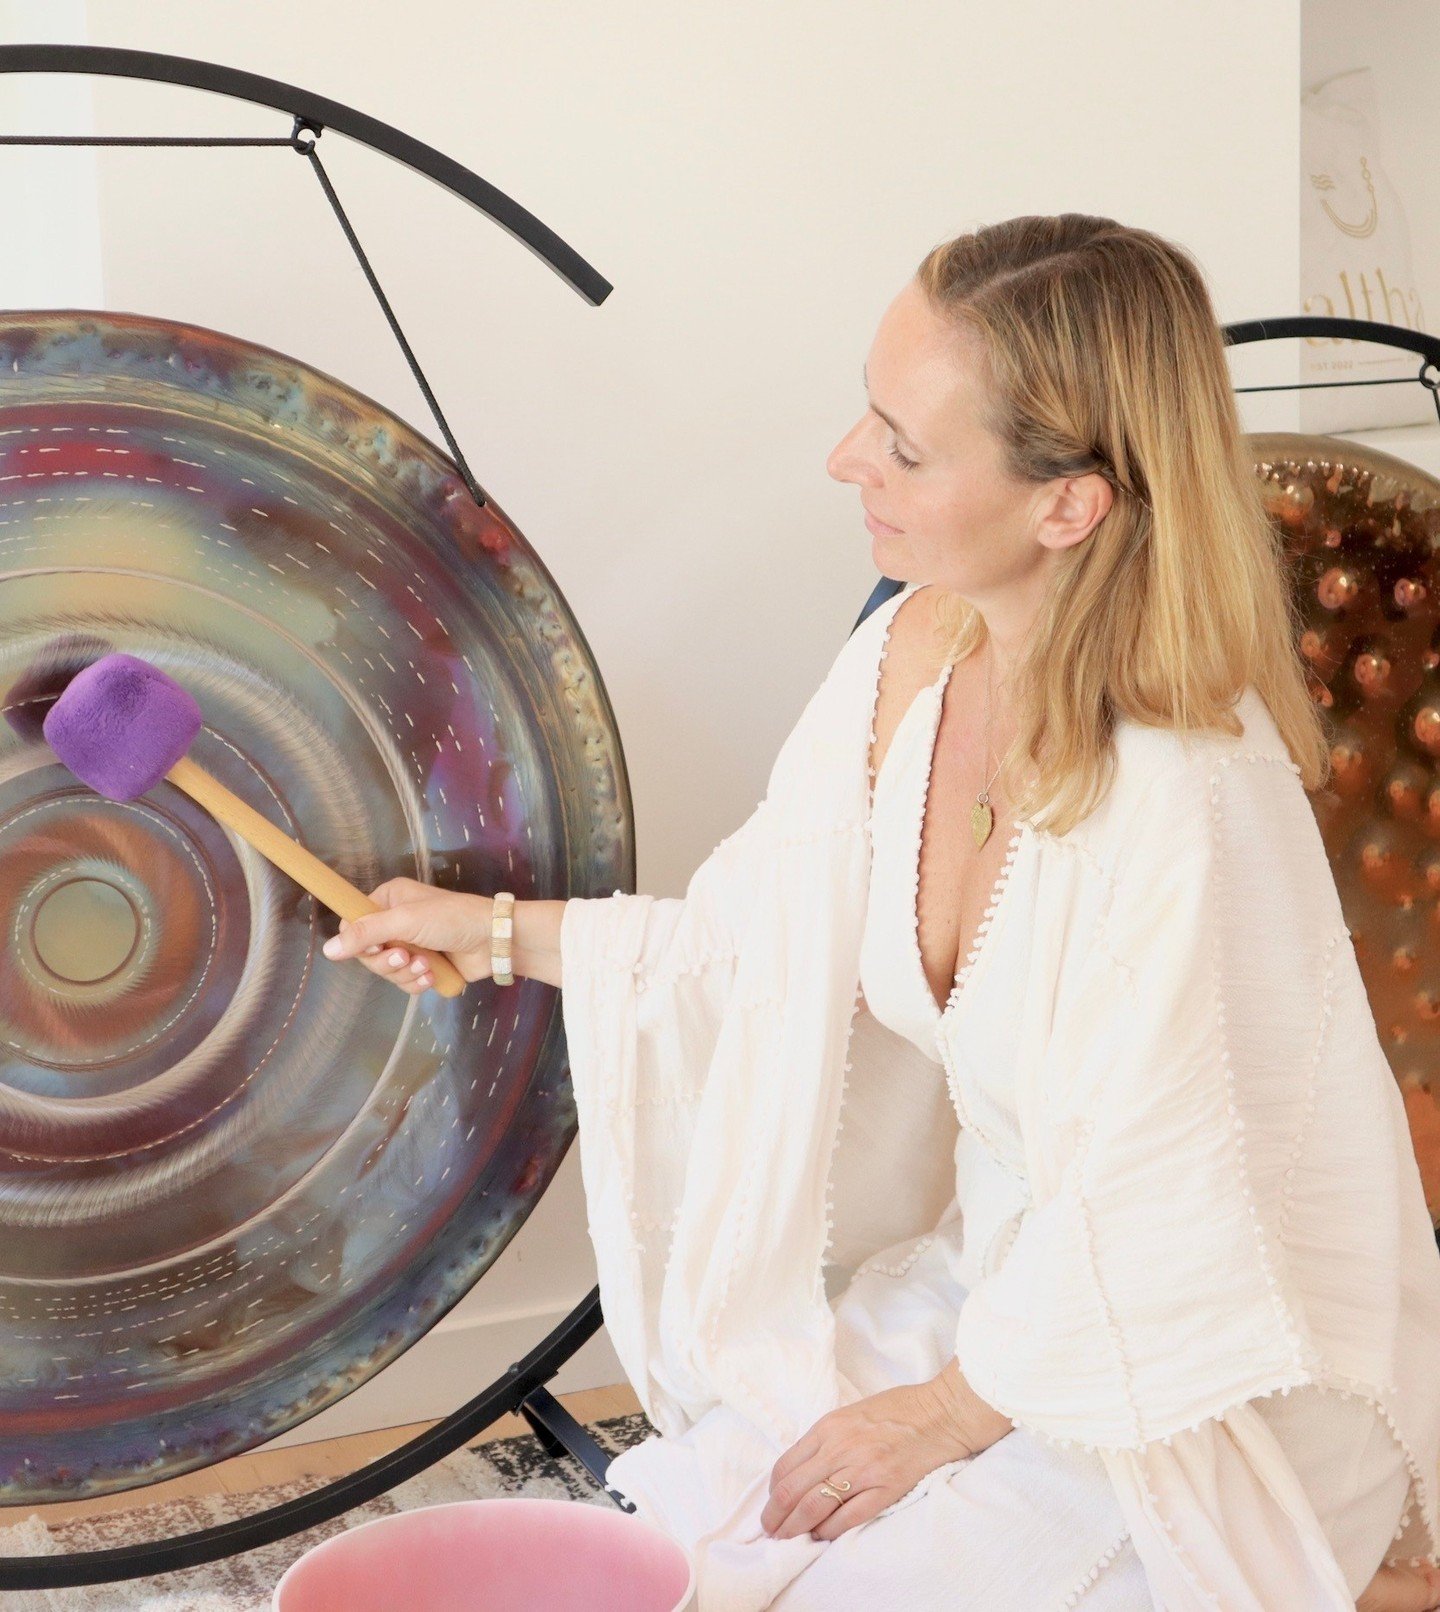 Gong + Hypnosis = the perfect way to reprogram your subconscious mind.⁠
⁠
At Altha, we use the powerful sounds of the gong to deeply relax our mental, emotional, spiritual, and physical bodies while we utilize therapeutic hypnosis to help participant